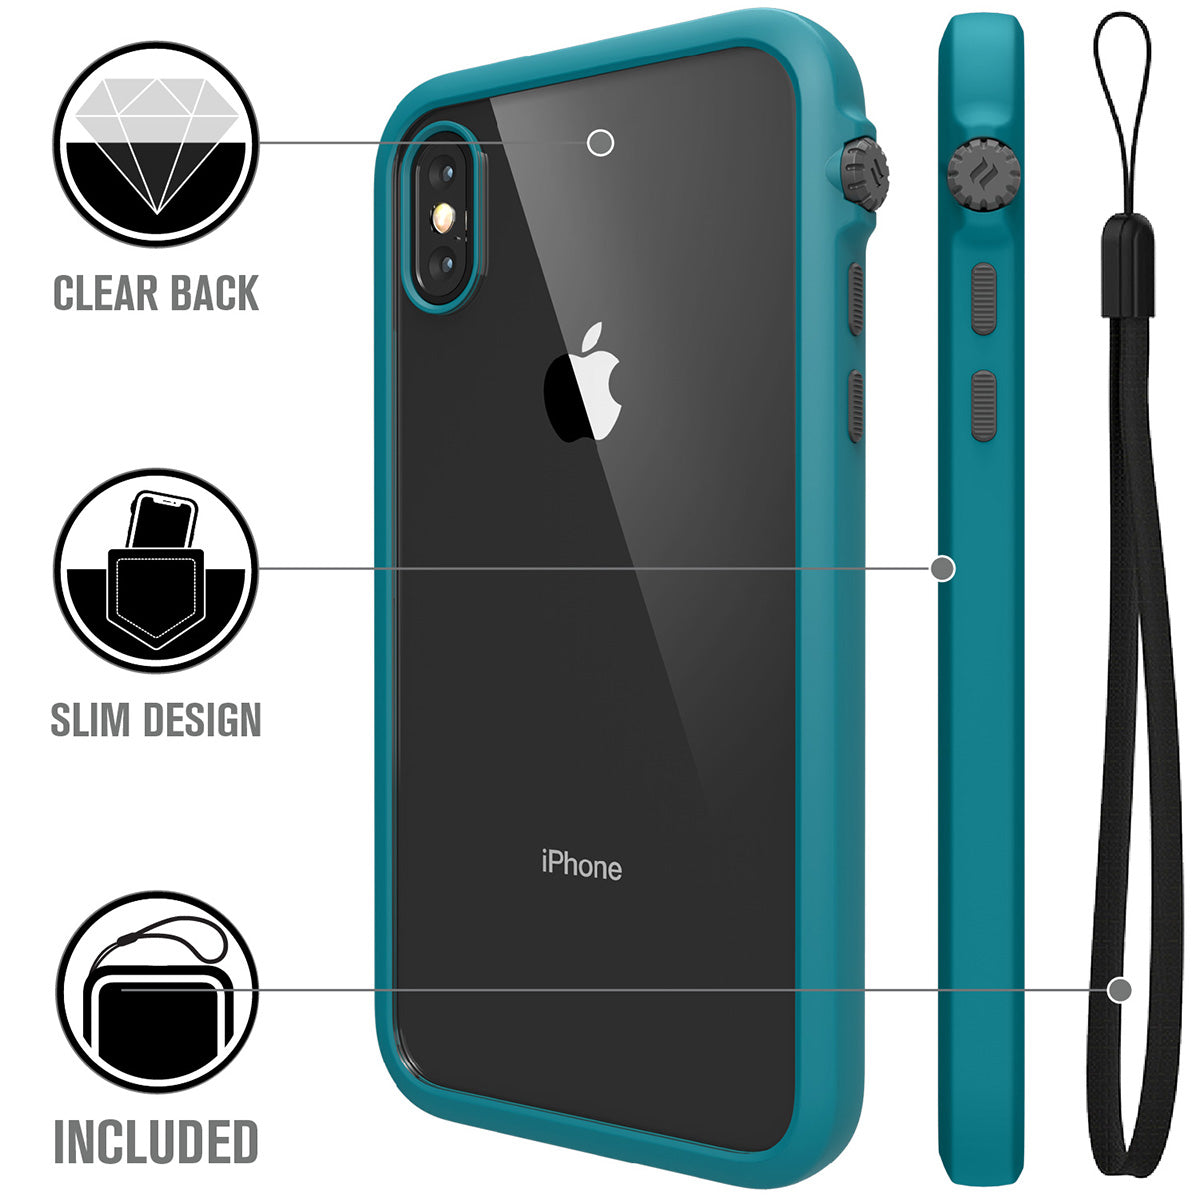 Catalyst Impact Protection Case for iPhone X/XR/Xs/Xs Max showing the back and side of the case with lanyard text reads clear back slim design lanyard included